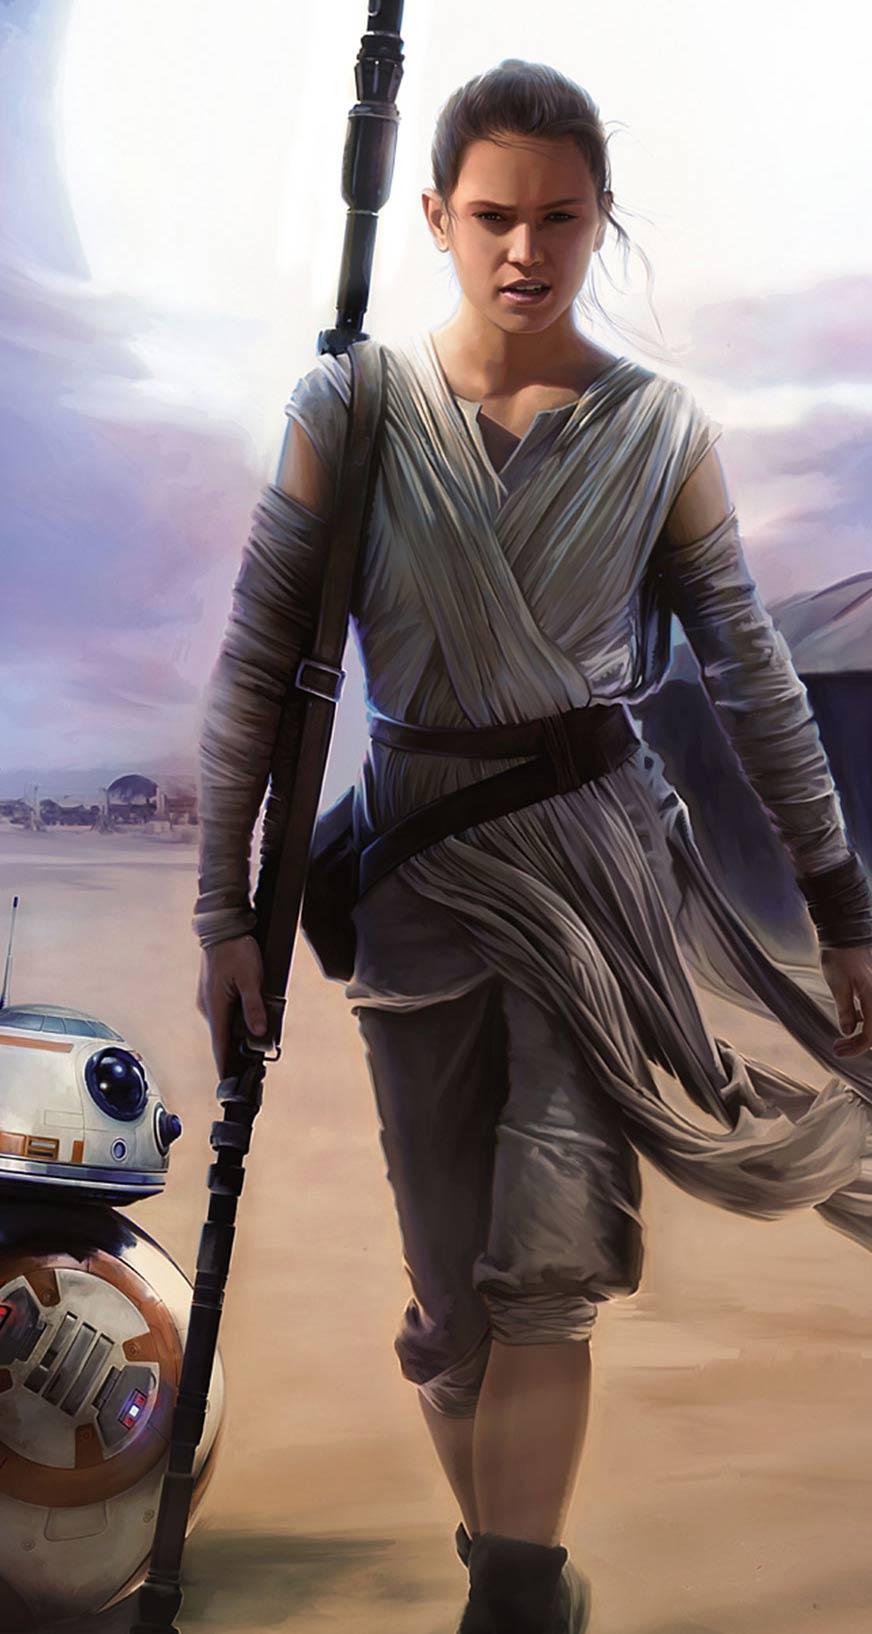 Star Wars: The Force Awakens wallpaper for your iPhone 6s